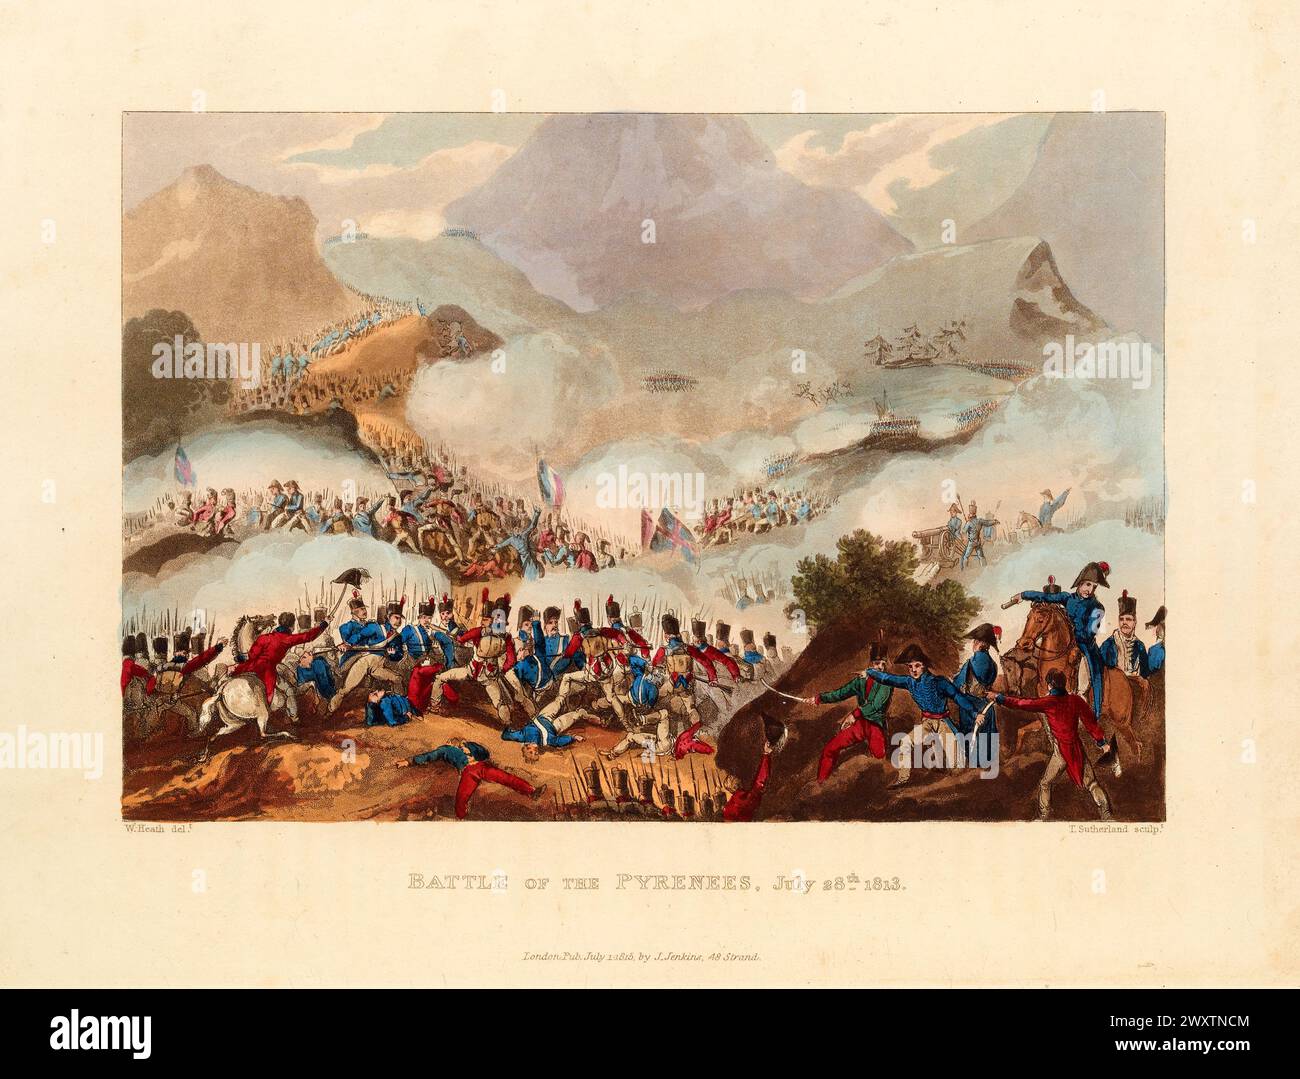 Battle of the Pynenees, July 28, 1813.  Vintage Coloured Aquatint, published by James Jenkins, 1815,  from  The martial achievements of Great Britain and her allies : from 1799 to 1815. Stock Photo